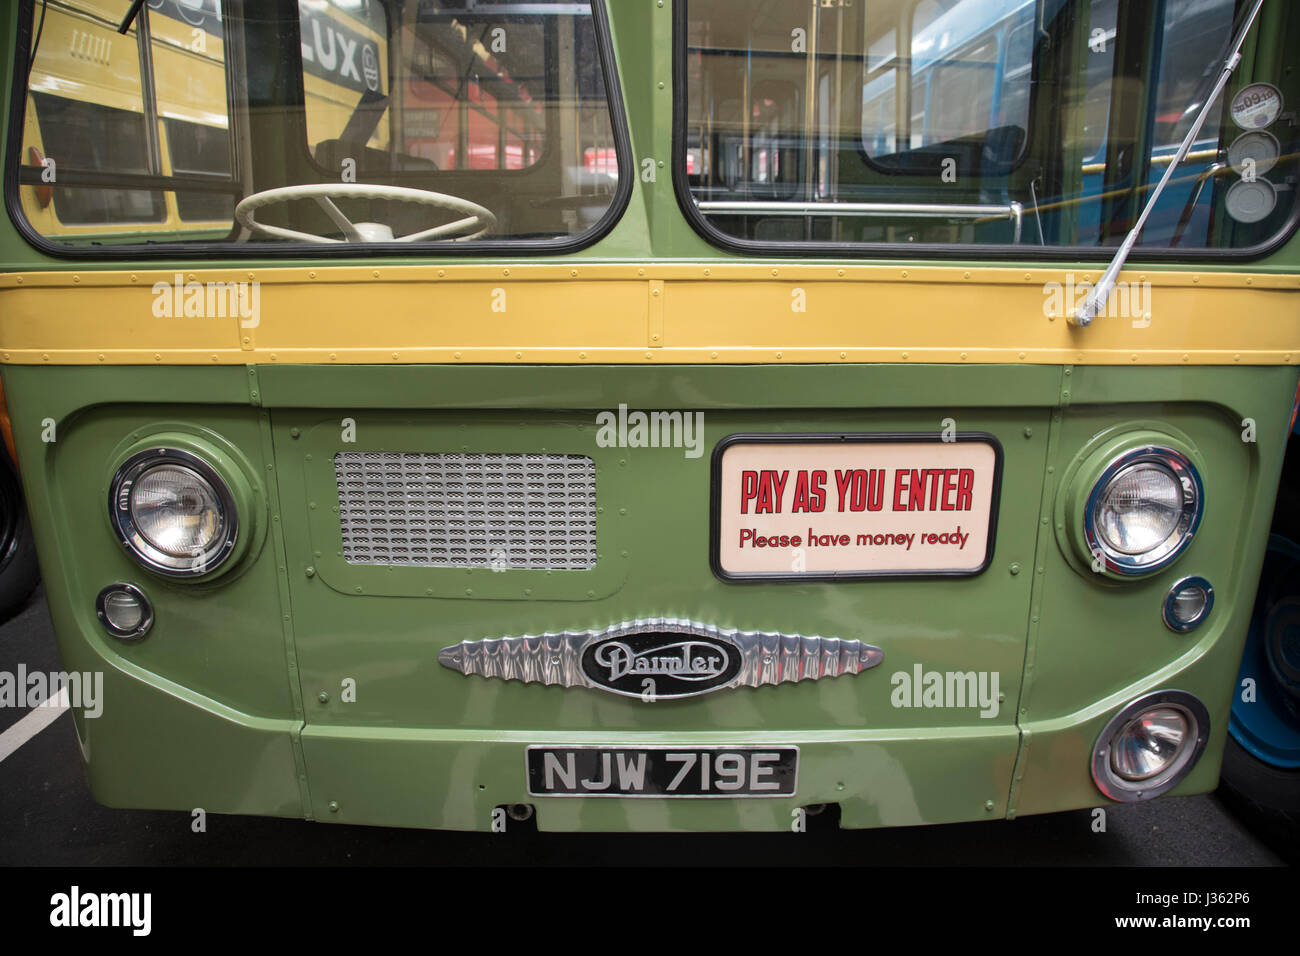 Open day at Wythall Transport Museum on May 1st 2017 in Wythall, England, United Kingdom. The Transport Museum, Wythall is a transport museum just outside Birmingham, at Wythall, Worcestershire.The museum is run by the charity The Birmingham and Midland Motor Omnibus Trust (BaMMOT). The museum has three halls, presenting a significant collection of preserved buses and coaches, including Midland Red and Birmingham City Transport vehicles. It is also home to the Elmdon Model Engineering Society (EMES) who operate the Wythall miniature railway within the grounds of the transport museum, giving ri Stock Photo